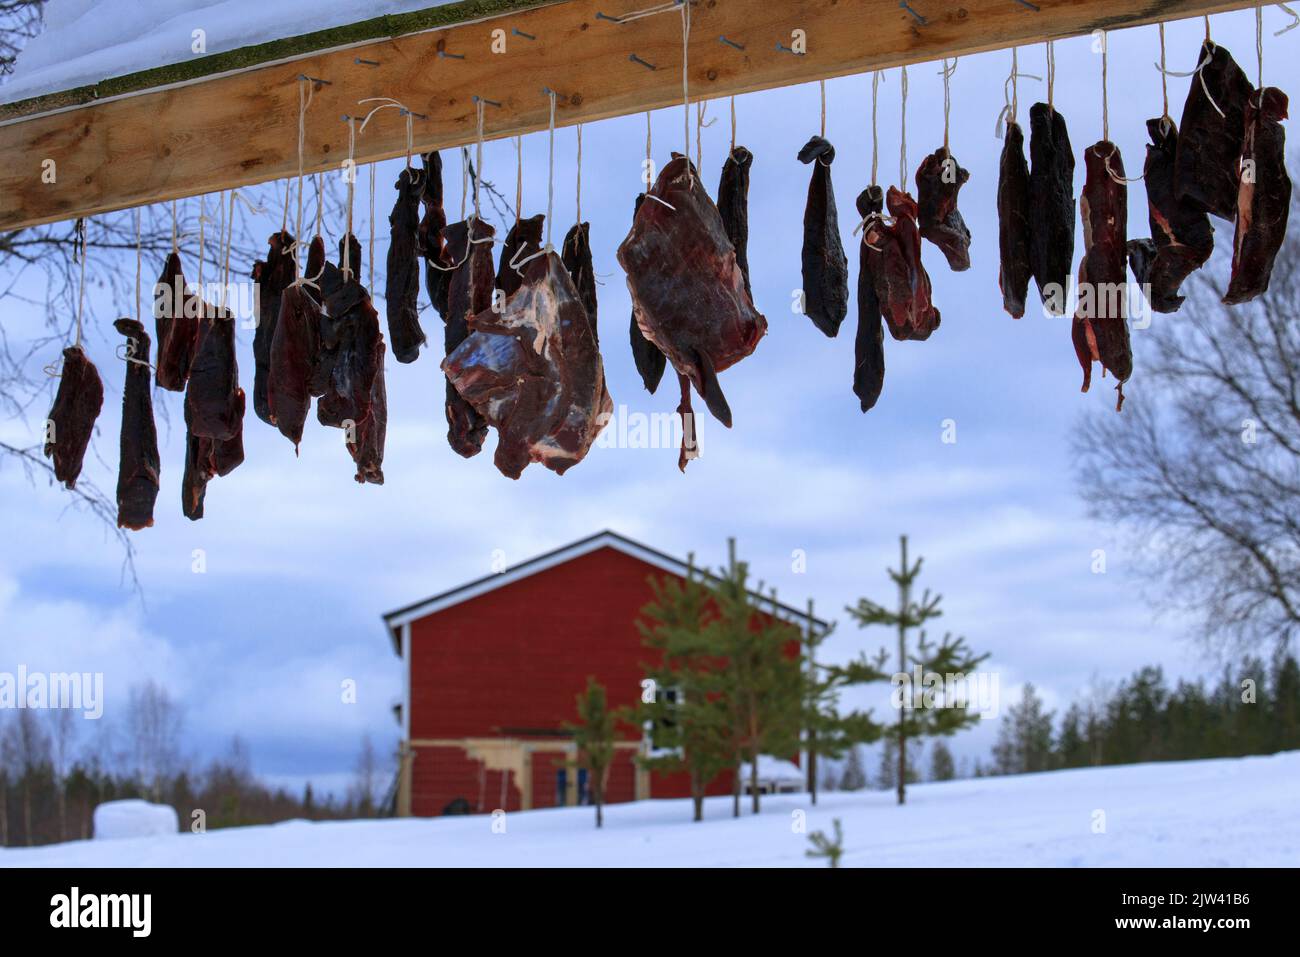 Reindeer meat drying in a farm in Salla, Lapland Finland.   Warmer temperatures mean the Sami are unable to find food for their reindeer.  In the last Stock Photo